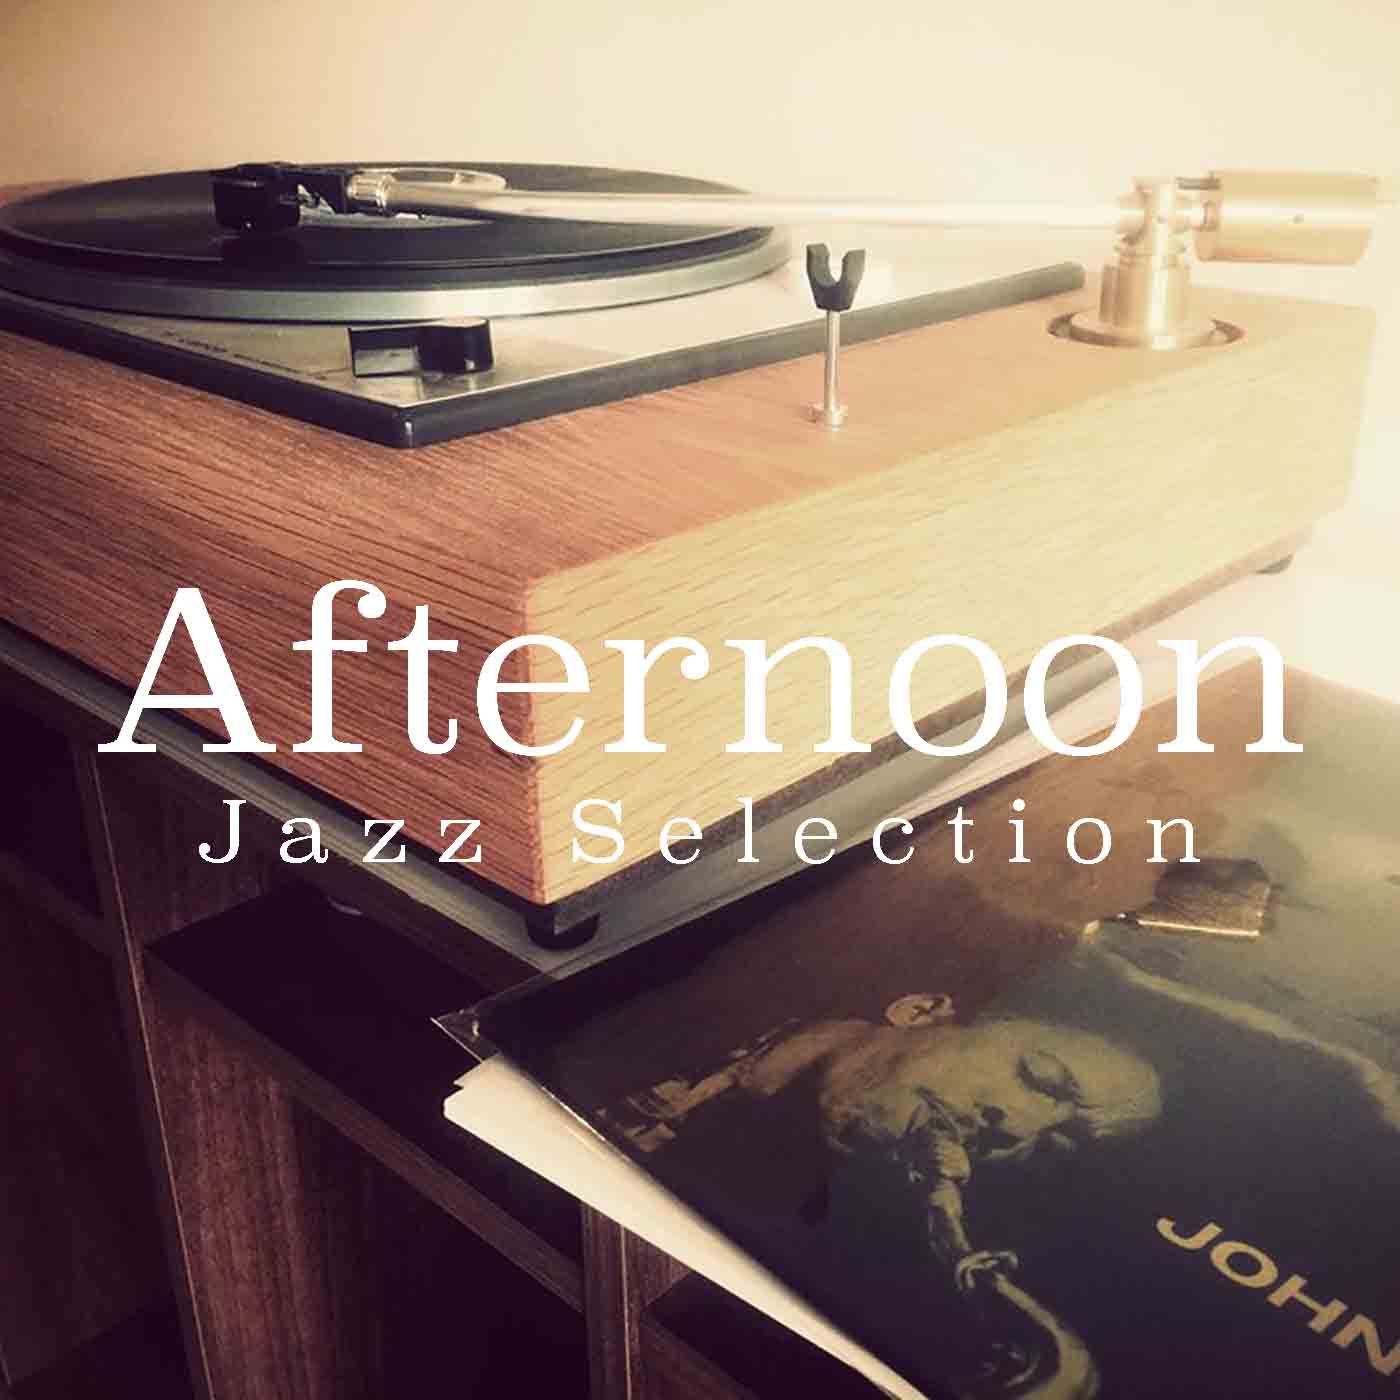 Afternoon Jazz Selection